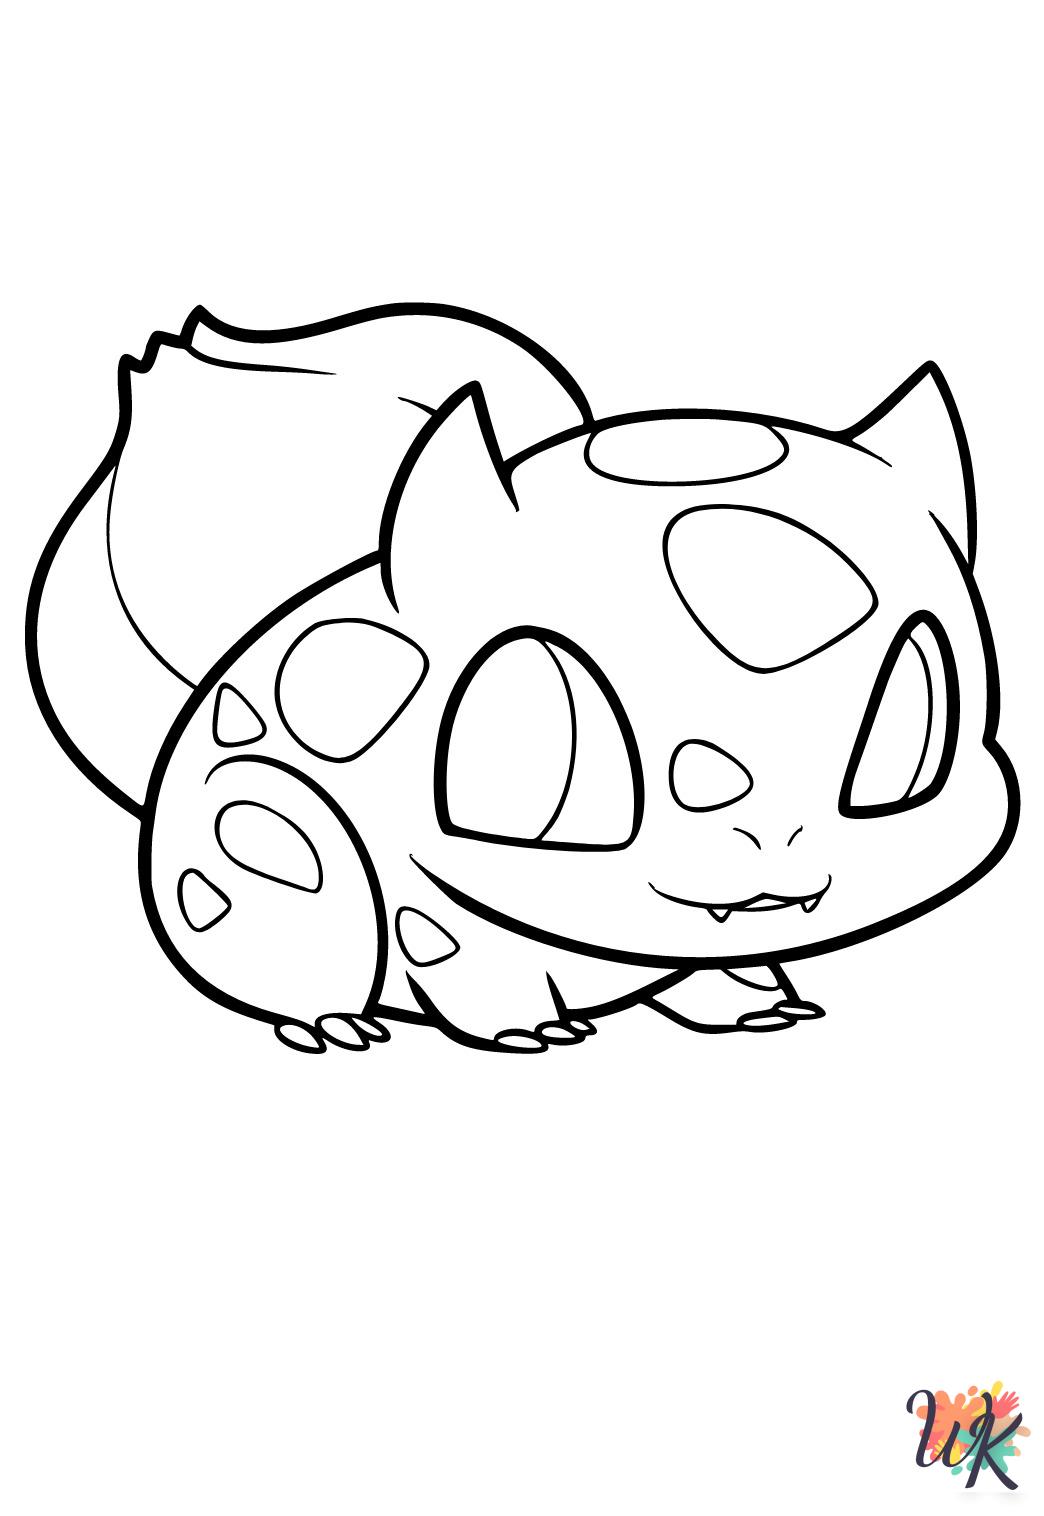 free full size printable Bulbasaur coloring pages for adults pdf